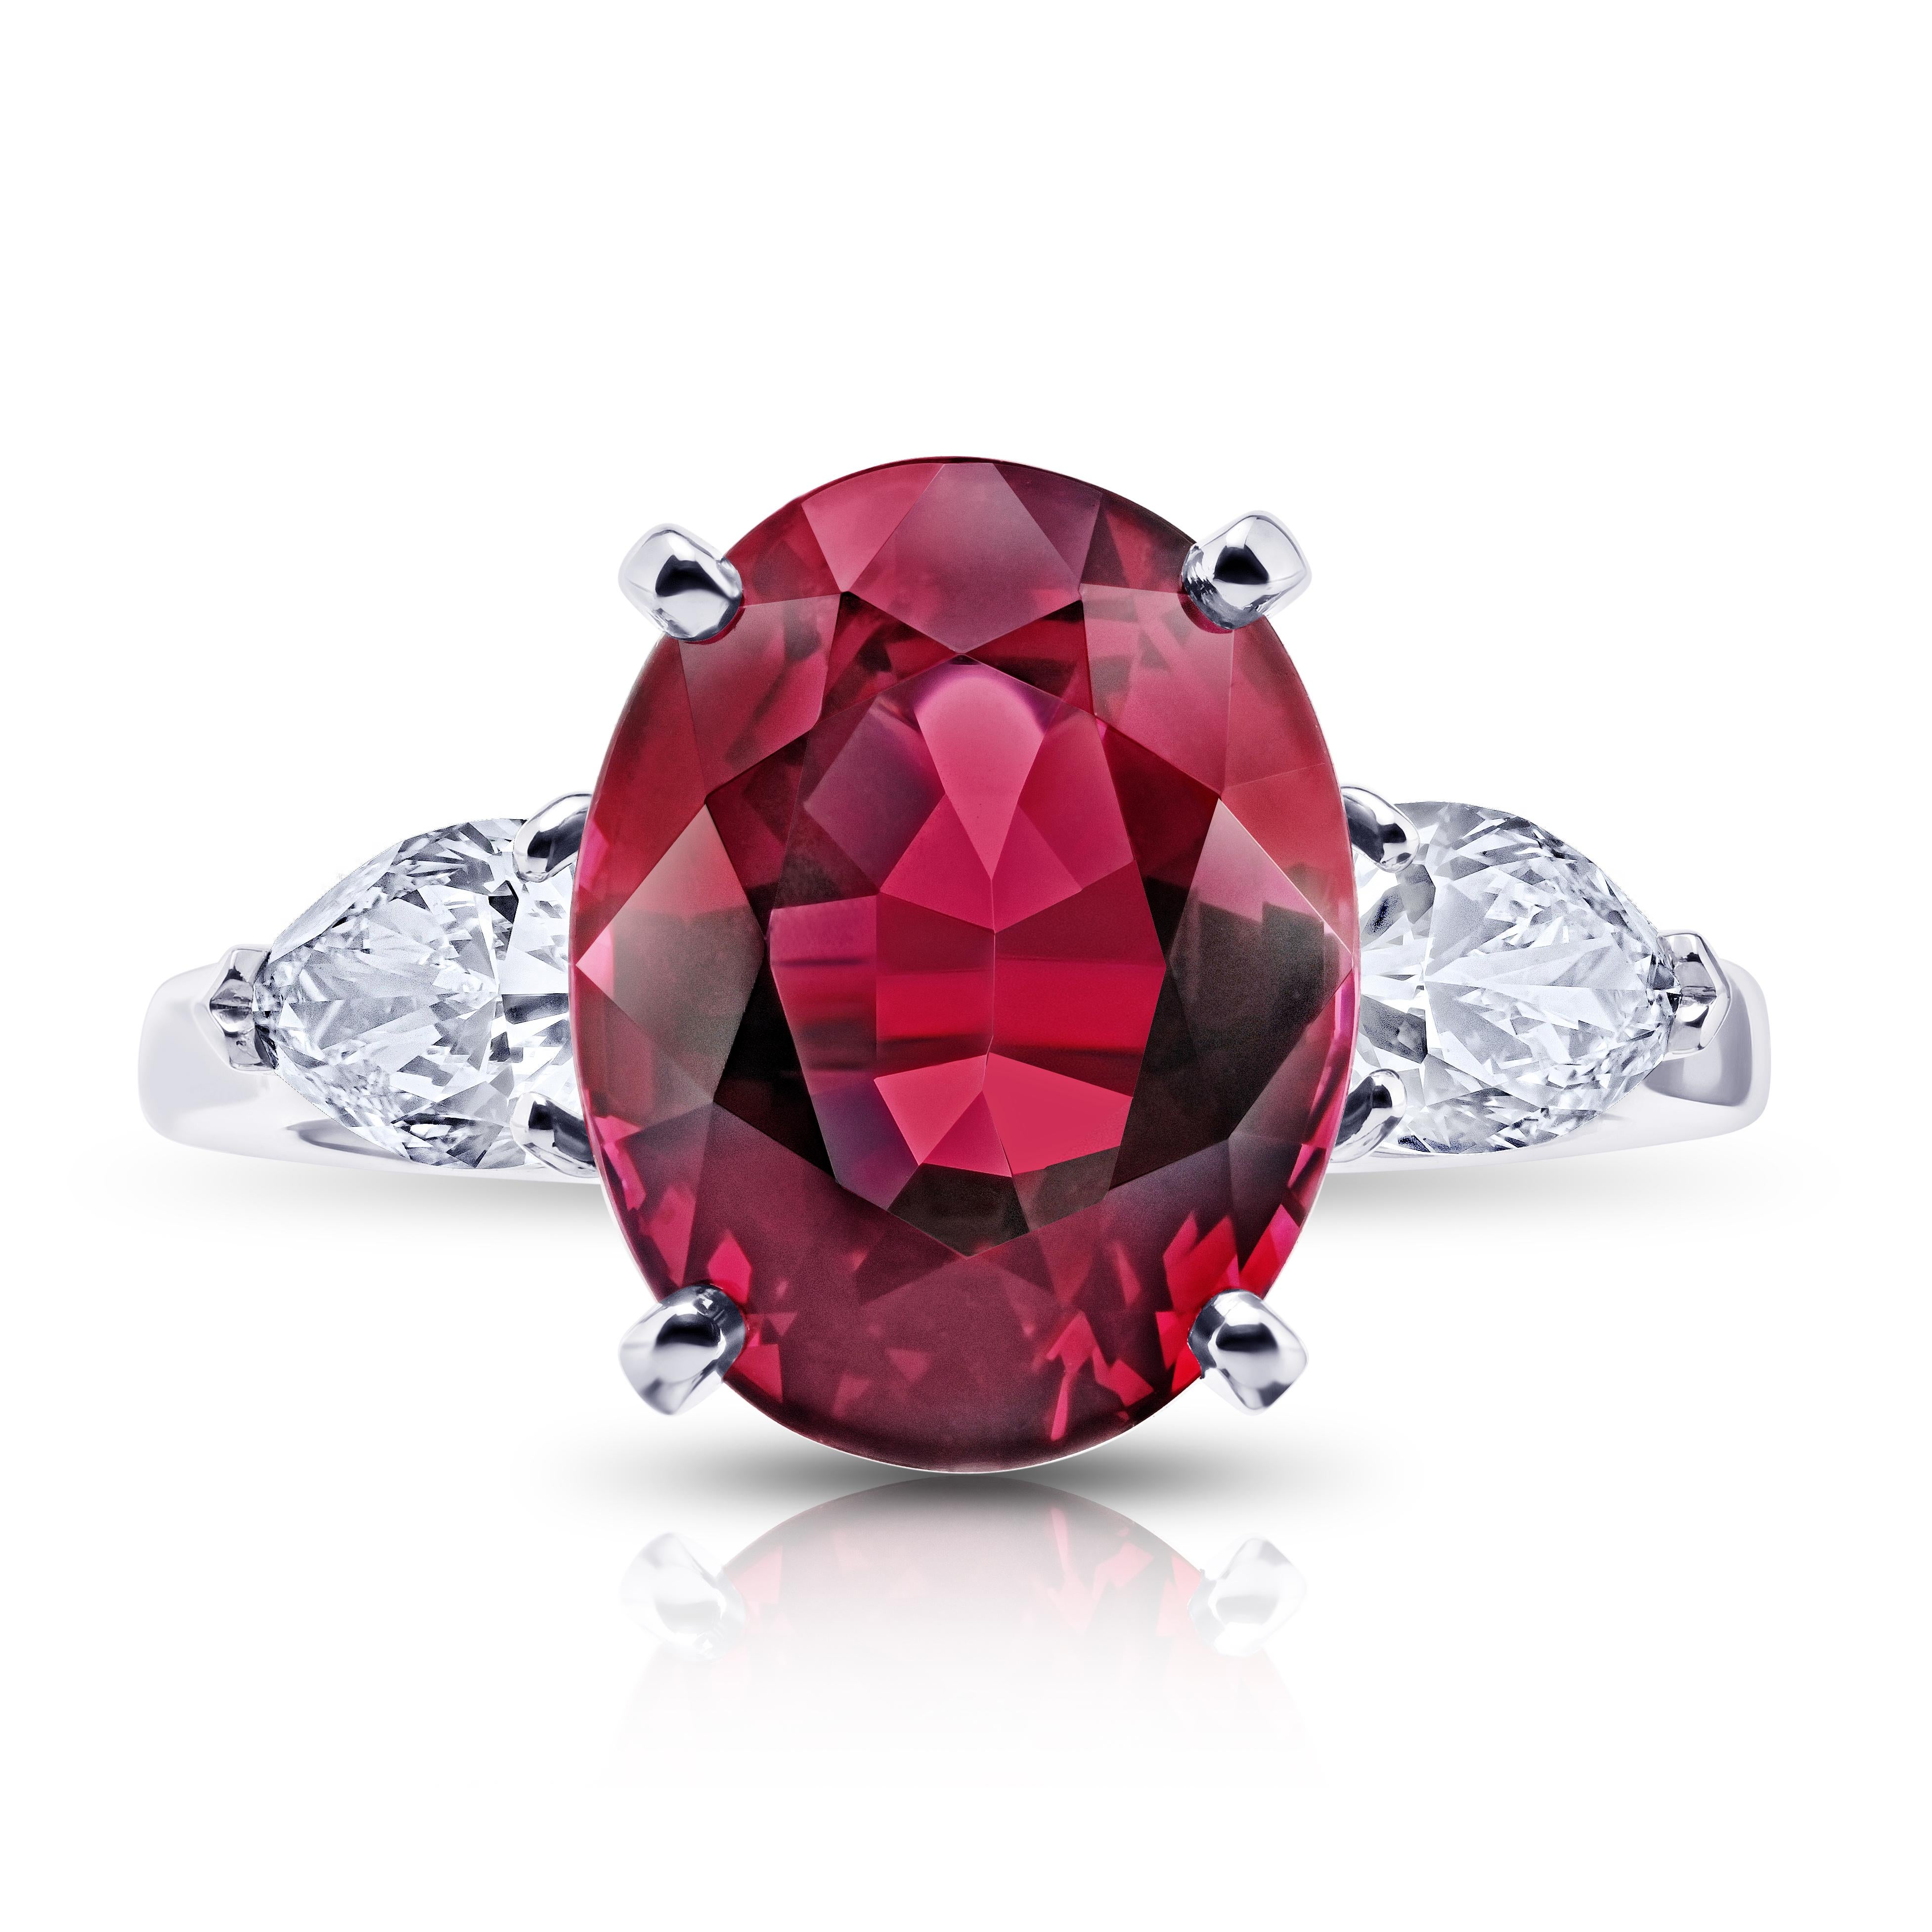 6.05 carat Oval Red Spinel with Diamonds .93 carats set in a handmade Plat & 18k Yellow ring